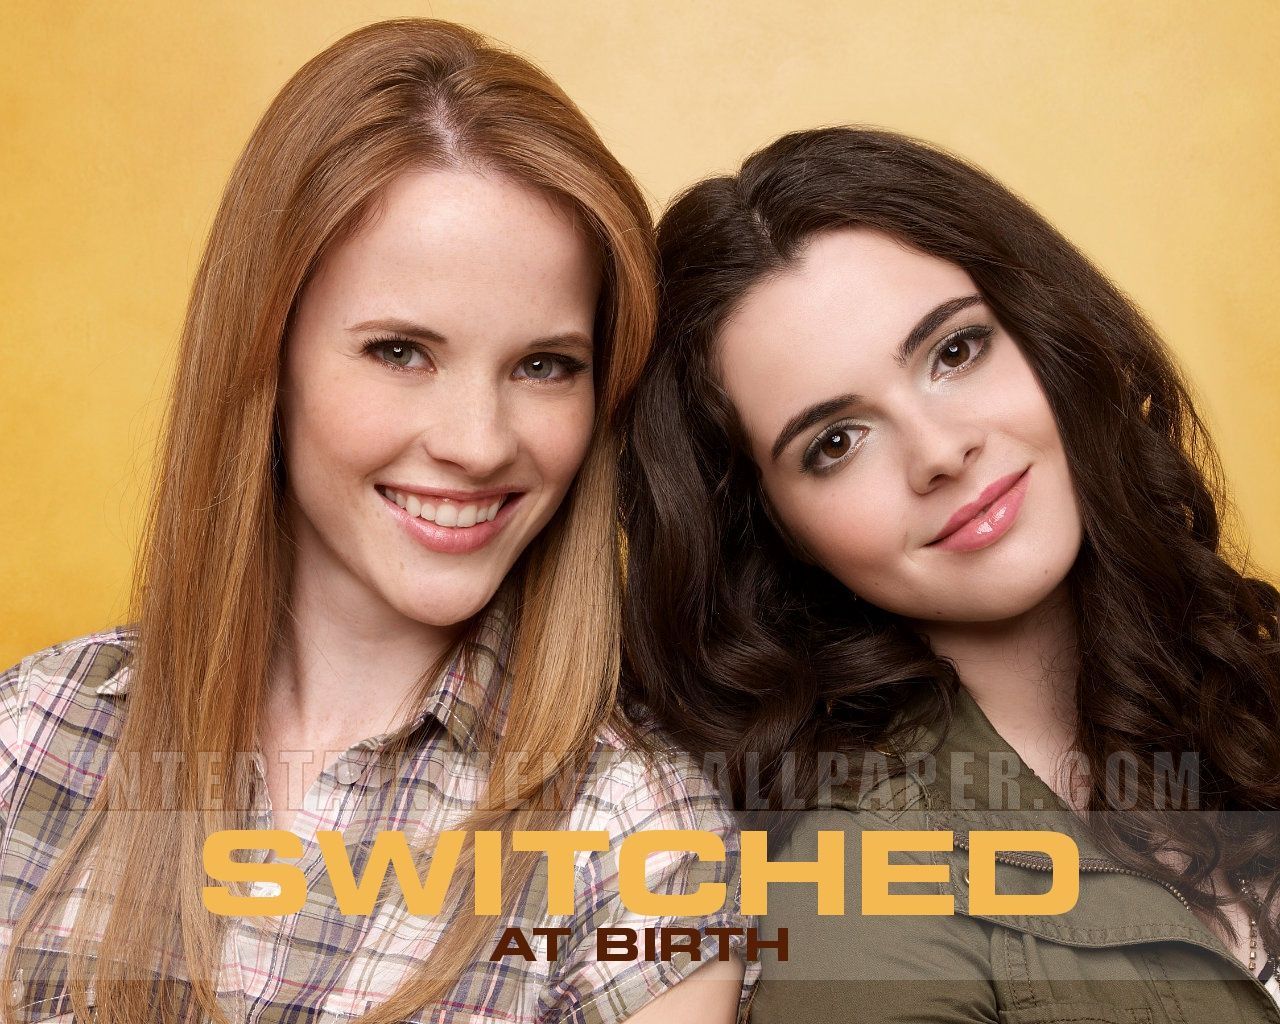 Switched At Birth Wallpapers